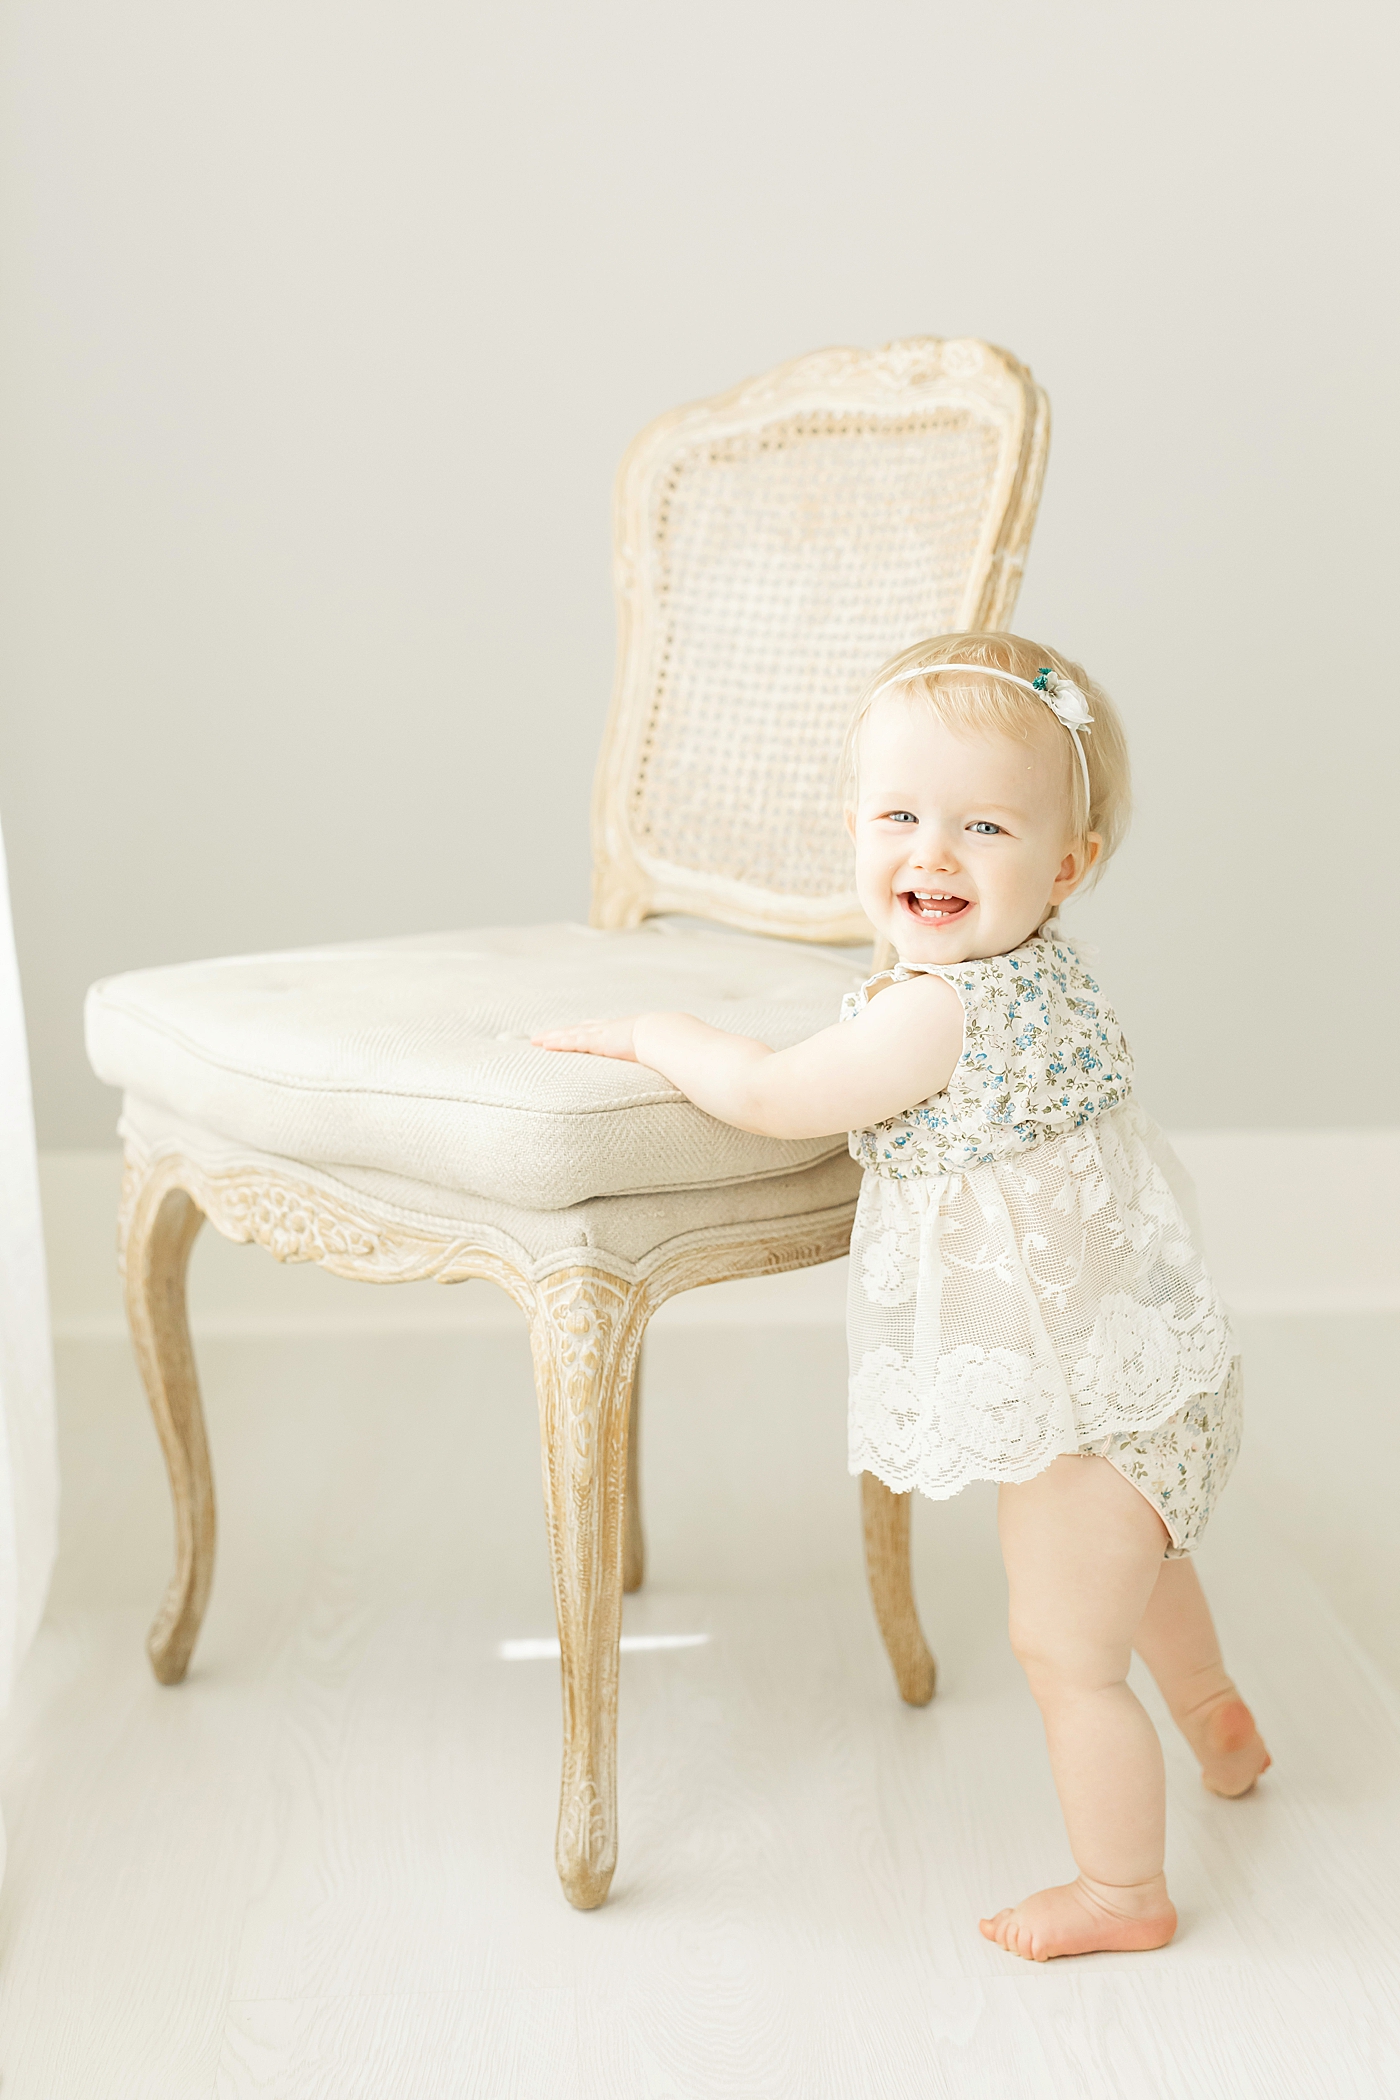 One year old in floral and lace romper standing up by a chair. Photo by Fresh Light Photography.